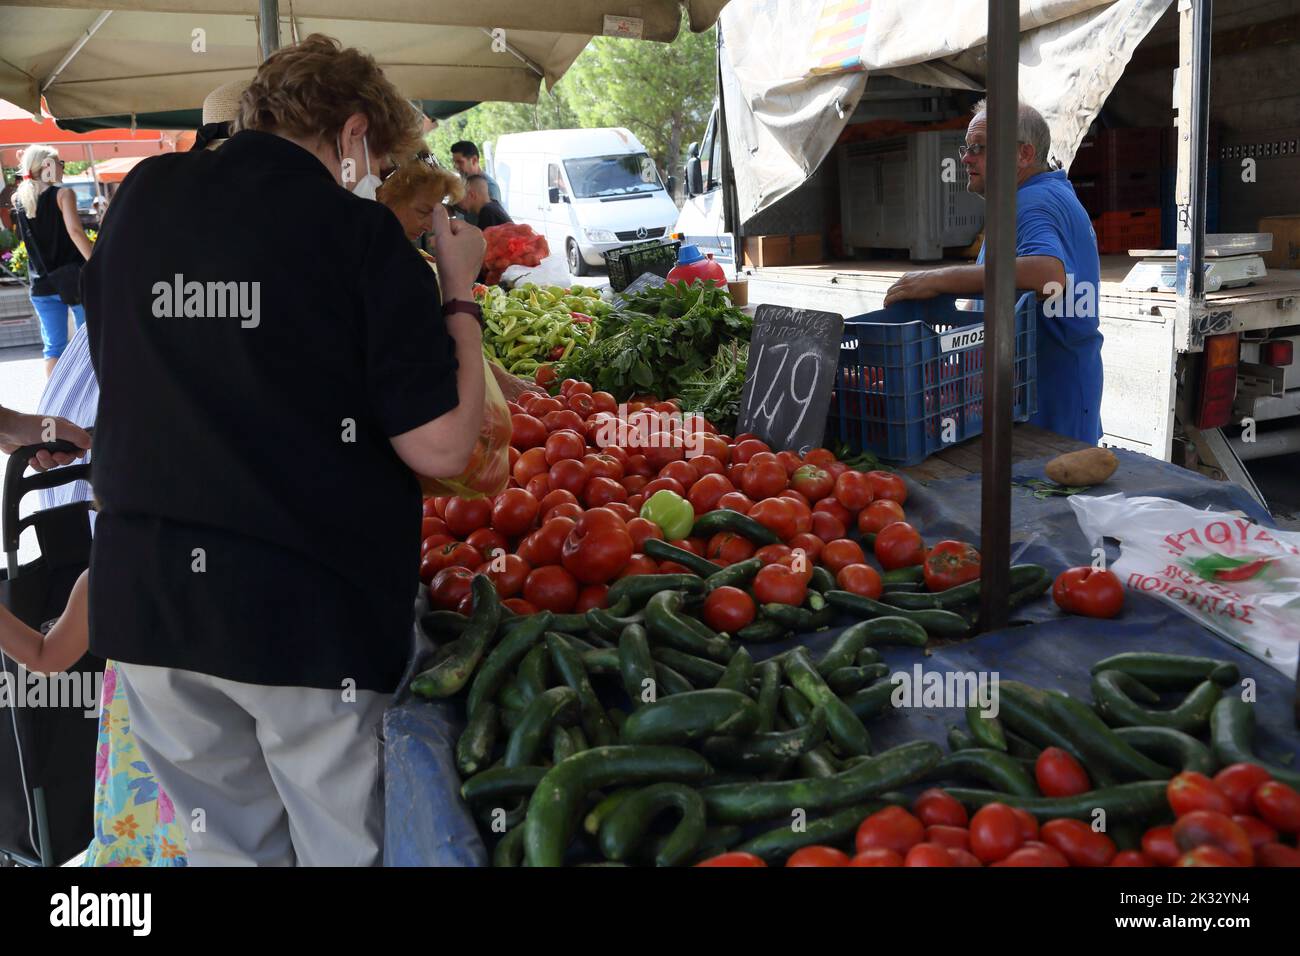 People Shopping at Saturday Market for Fruit And Vegetables Vouliagmeni Athens Greece Stock Photo